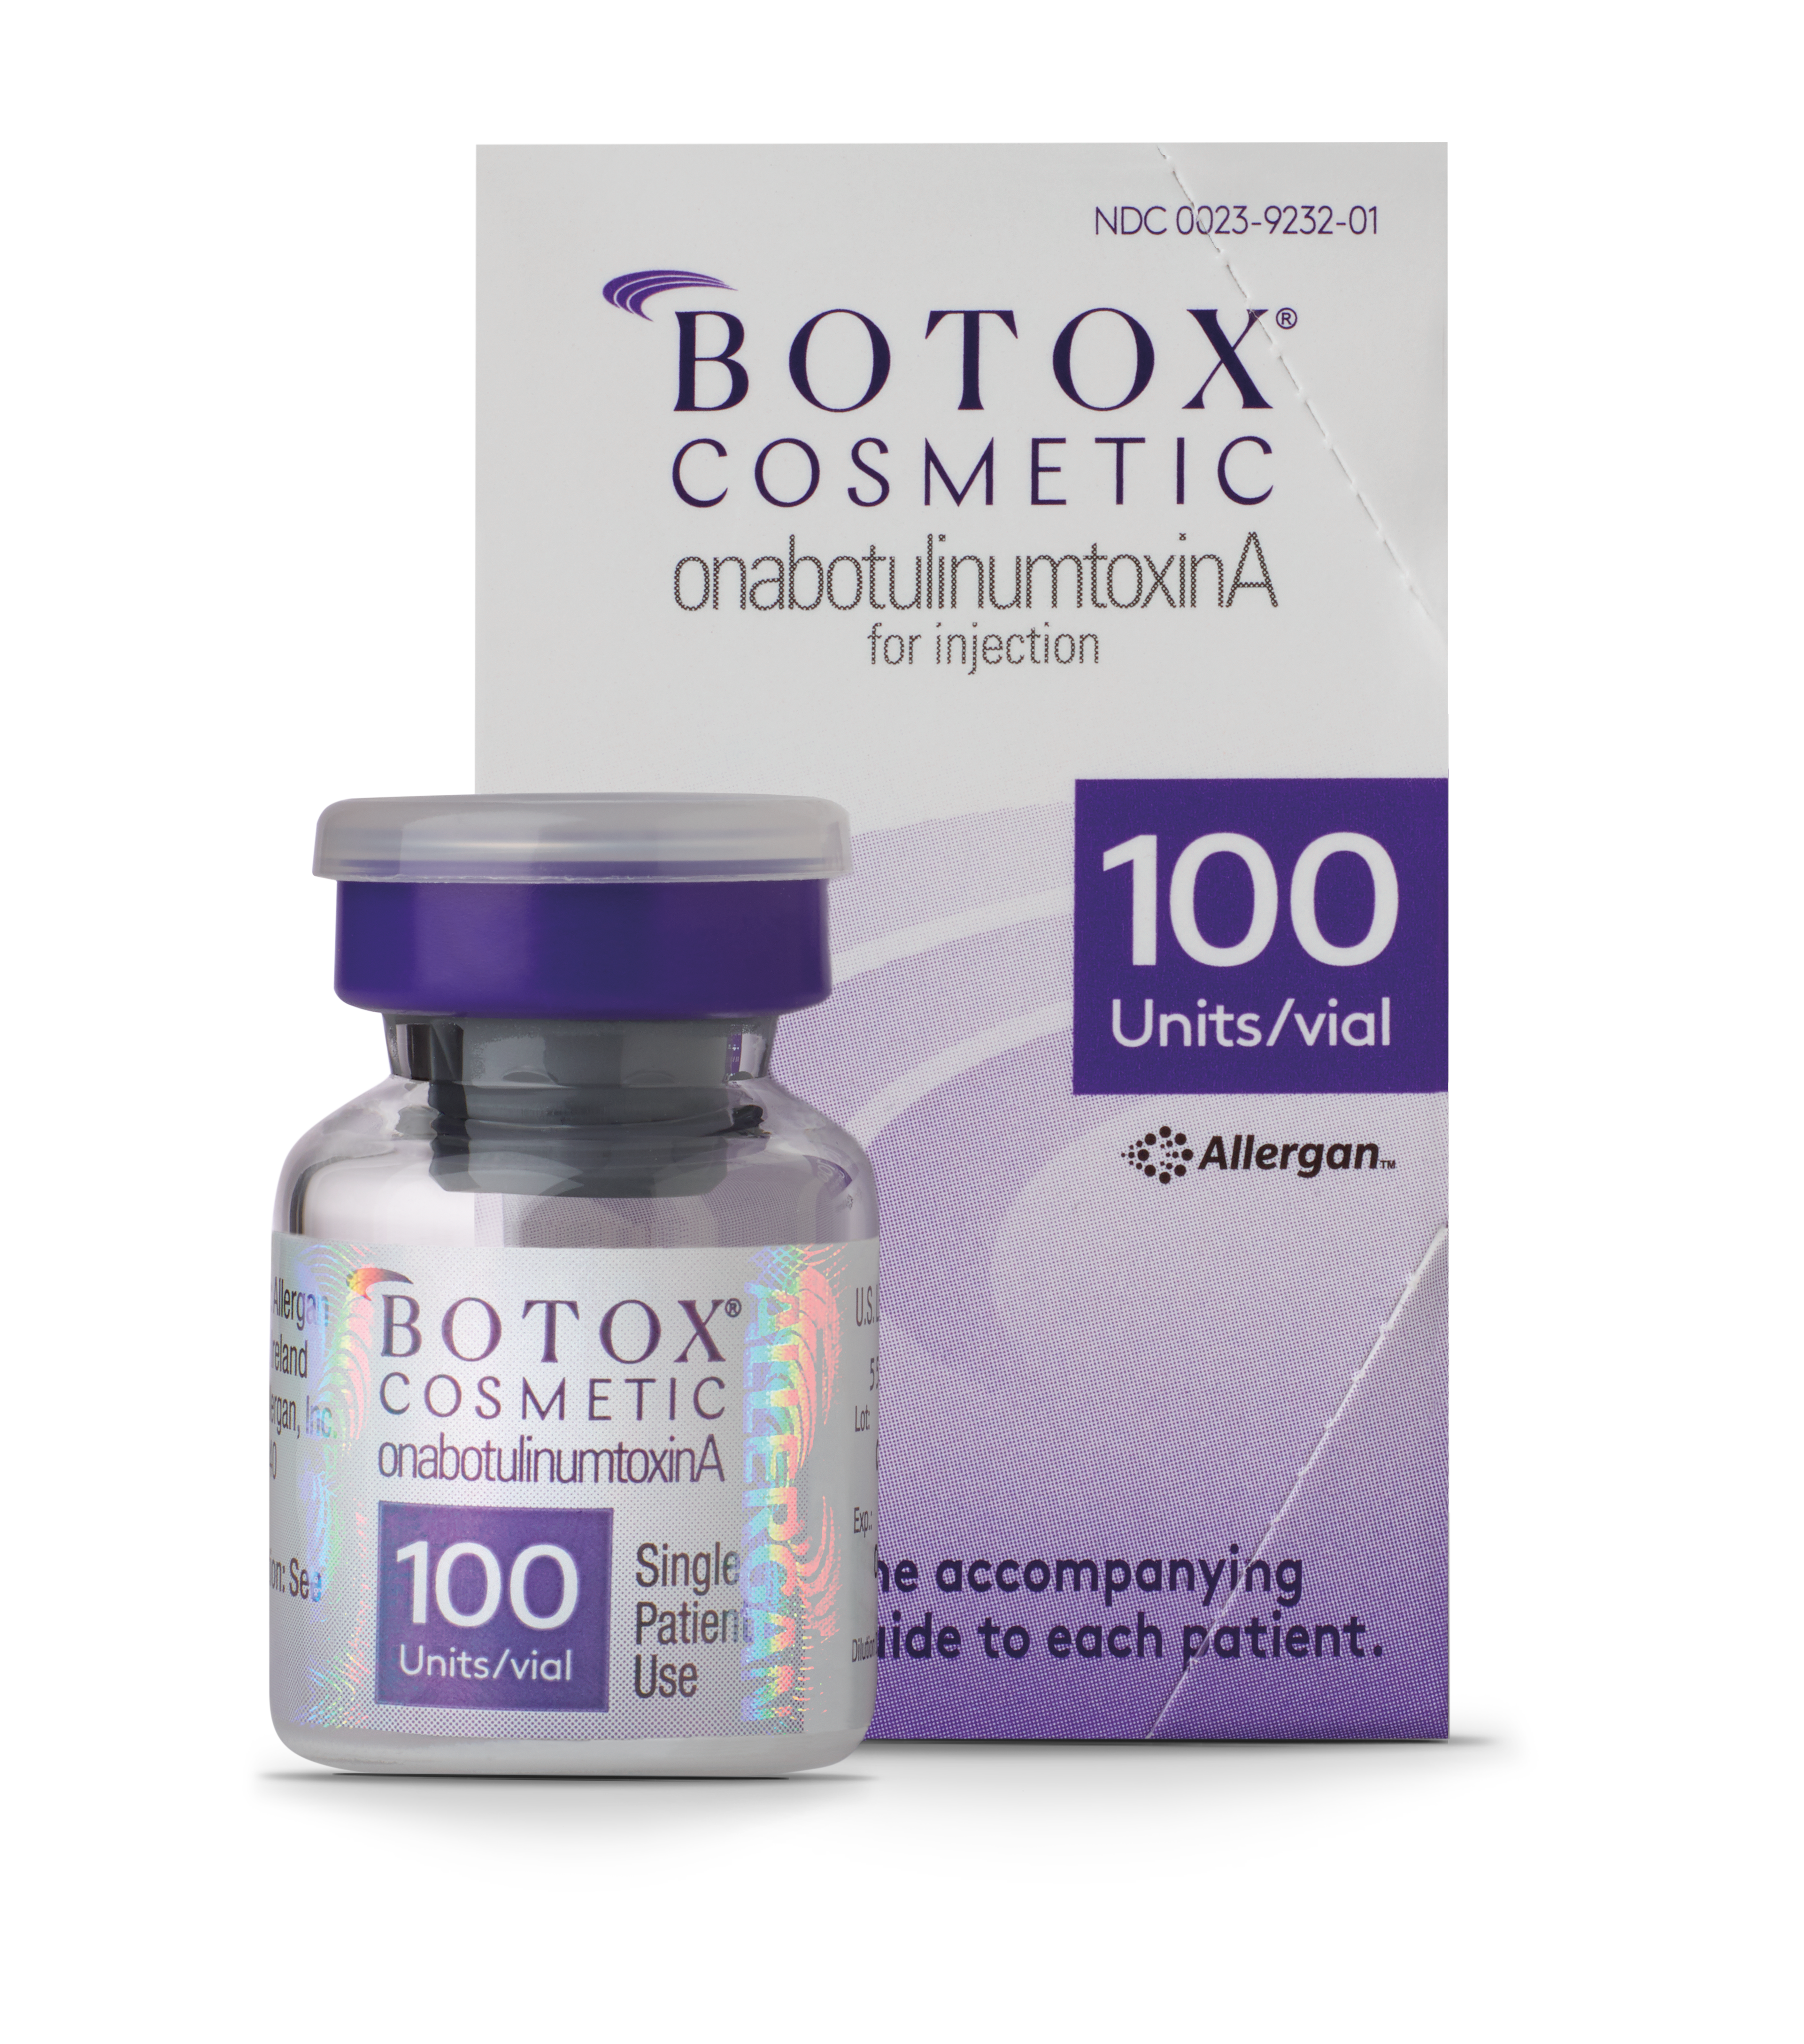 Botox Cosmetic Vial and Packaging